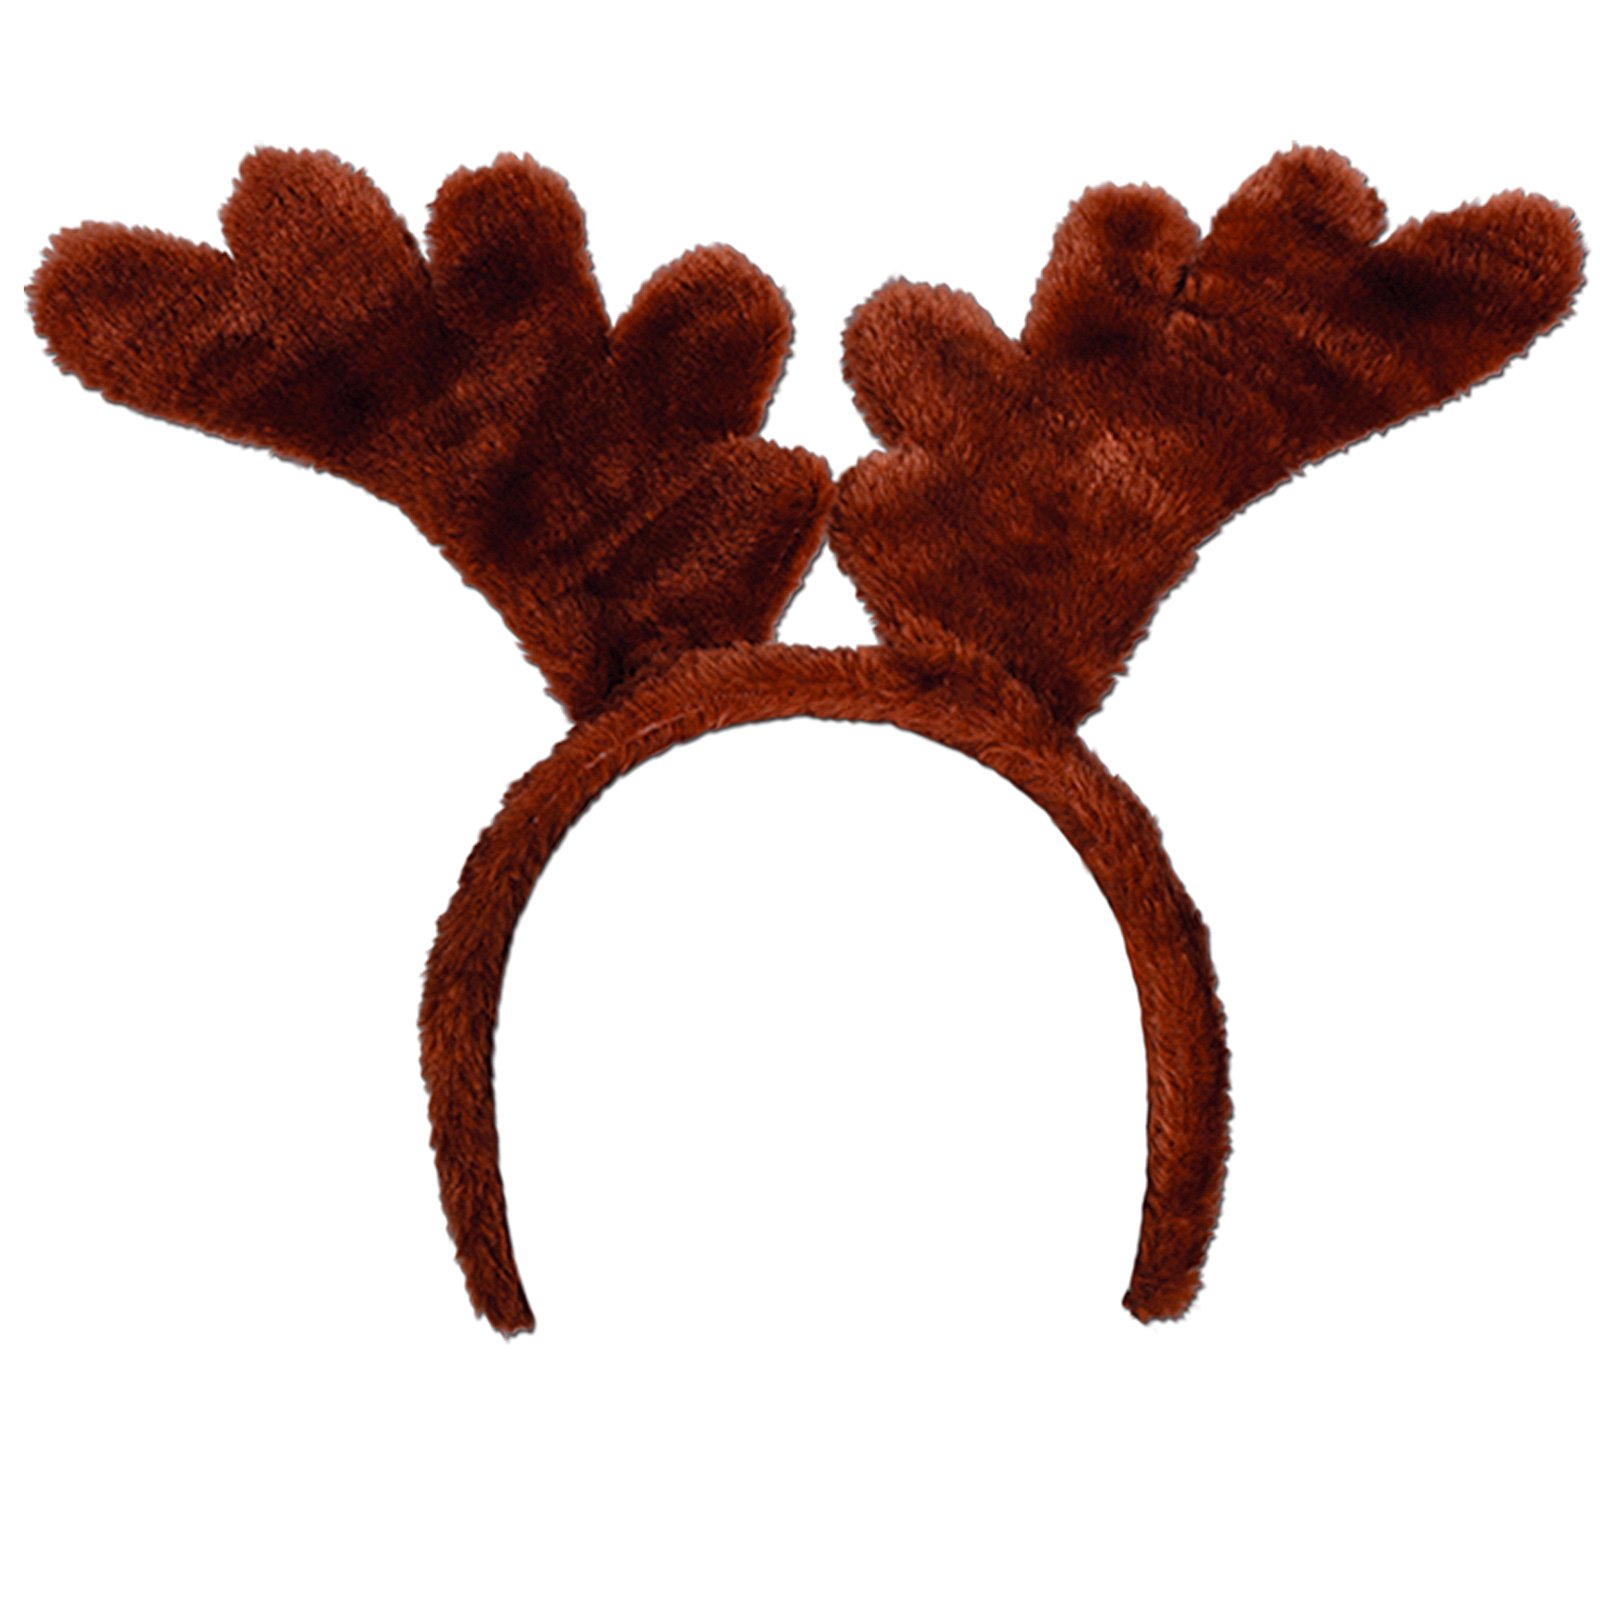 Cheap Soft Touch Reindeer Antlers At Go4costumes Com